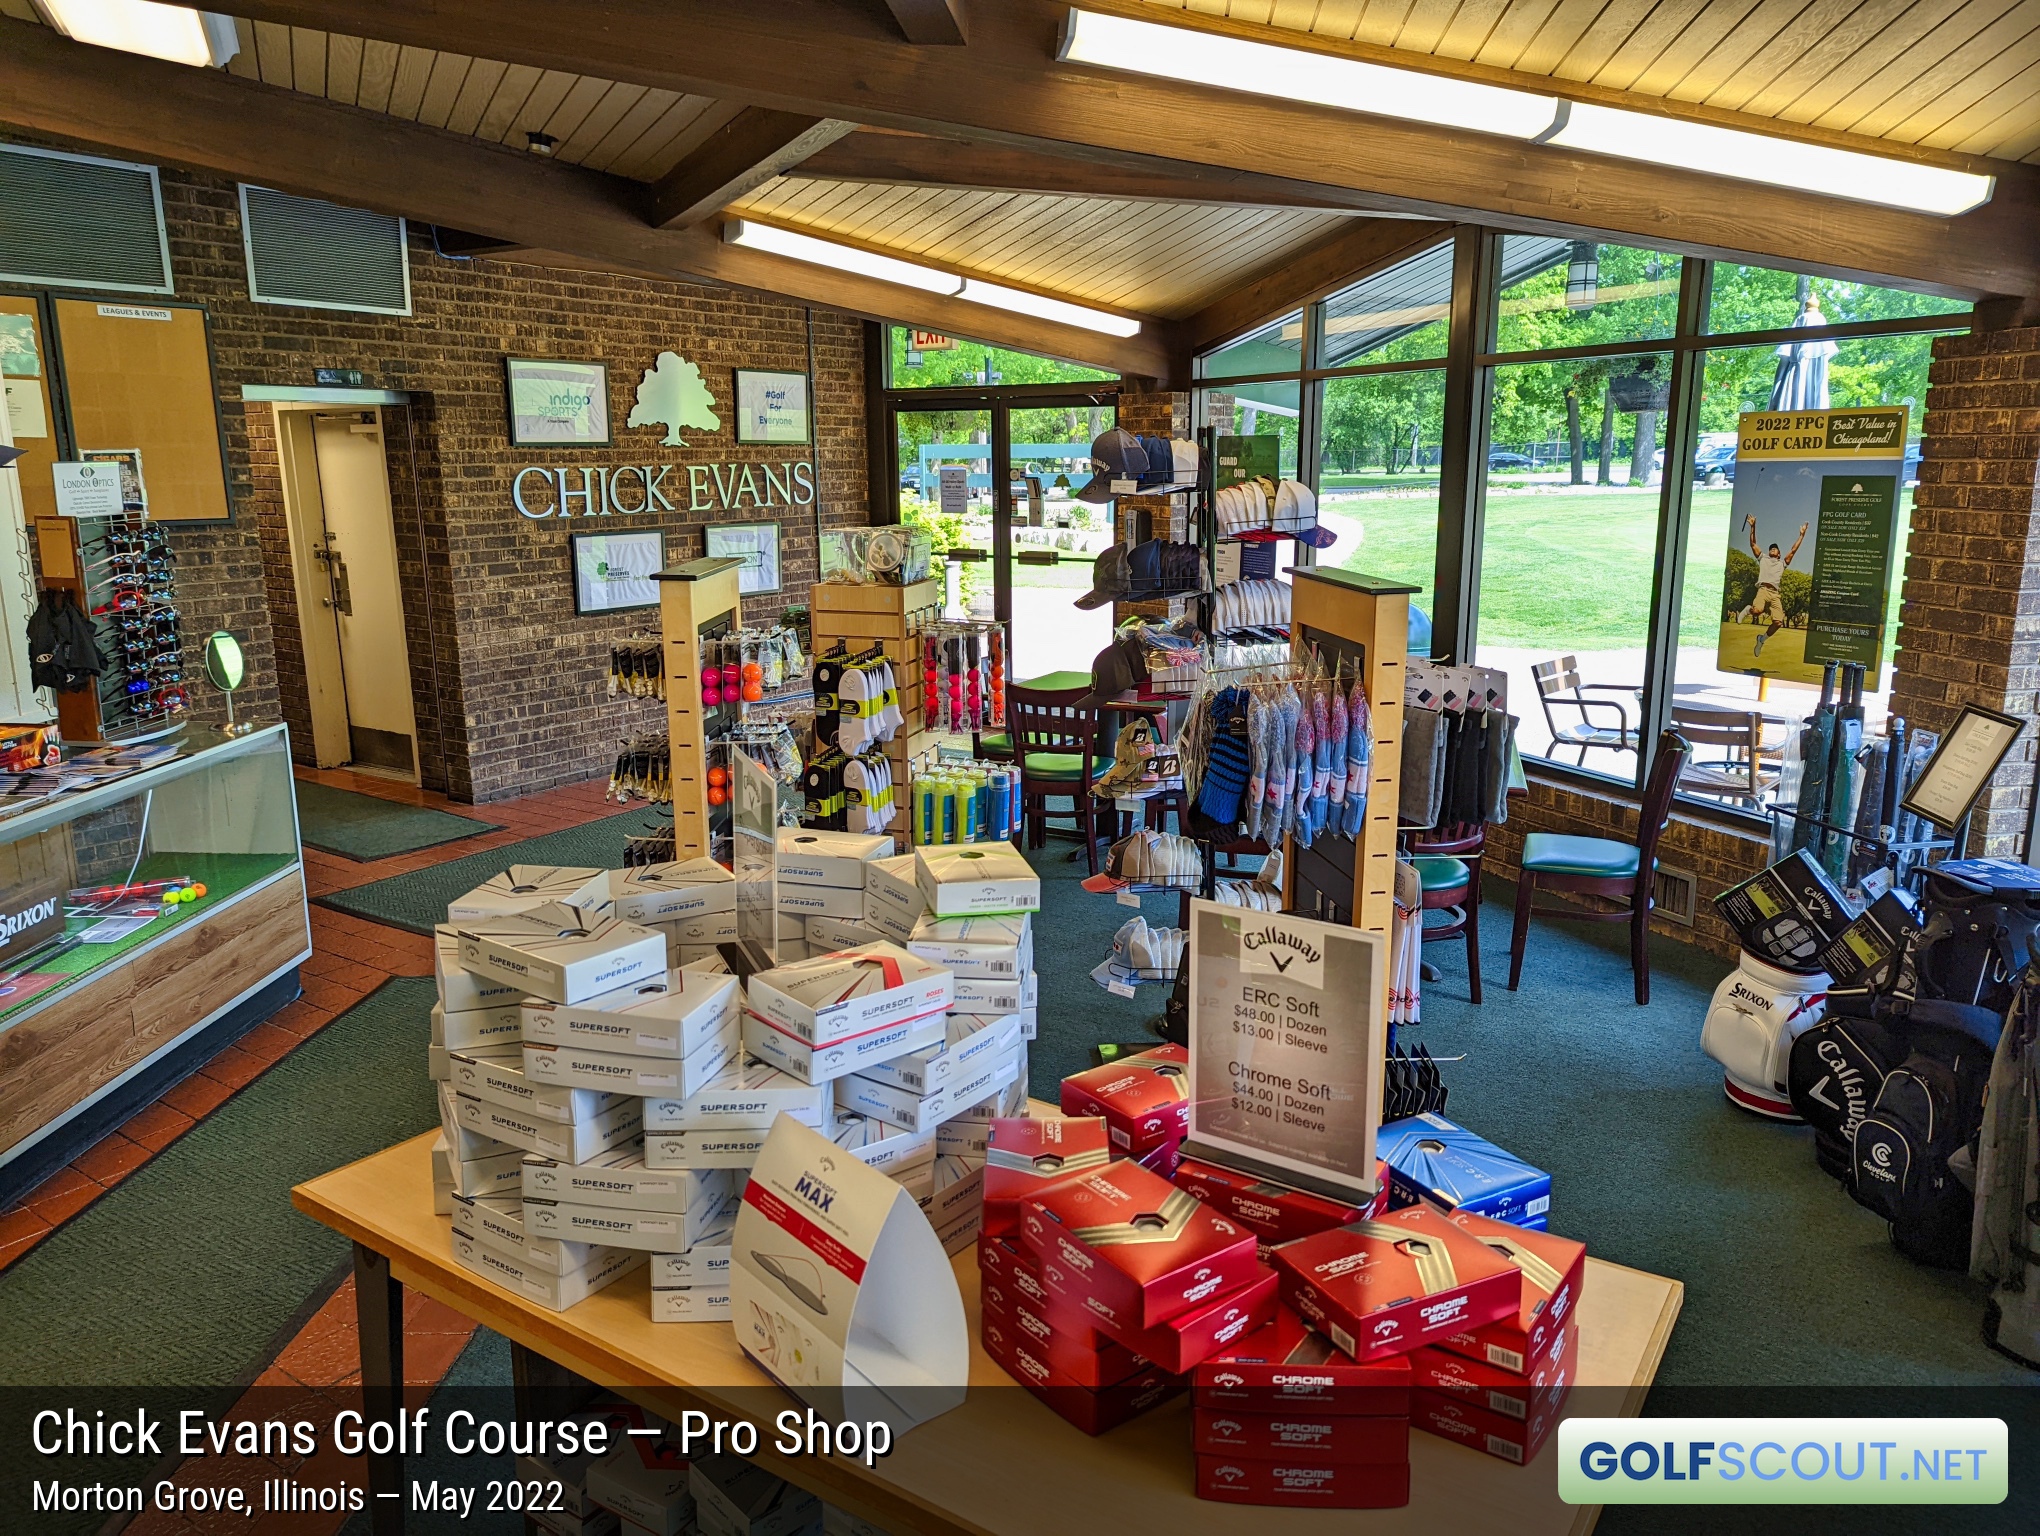 Photo of the pro shop at Chick Evans Golf Course in Morton Grove, Illinois. They have cigars too.